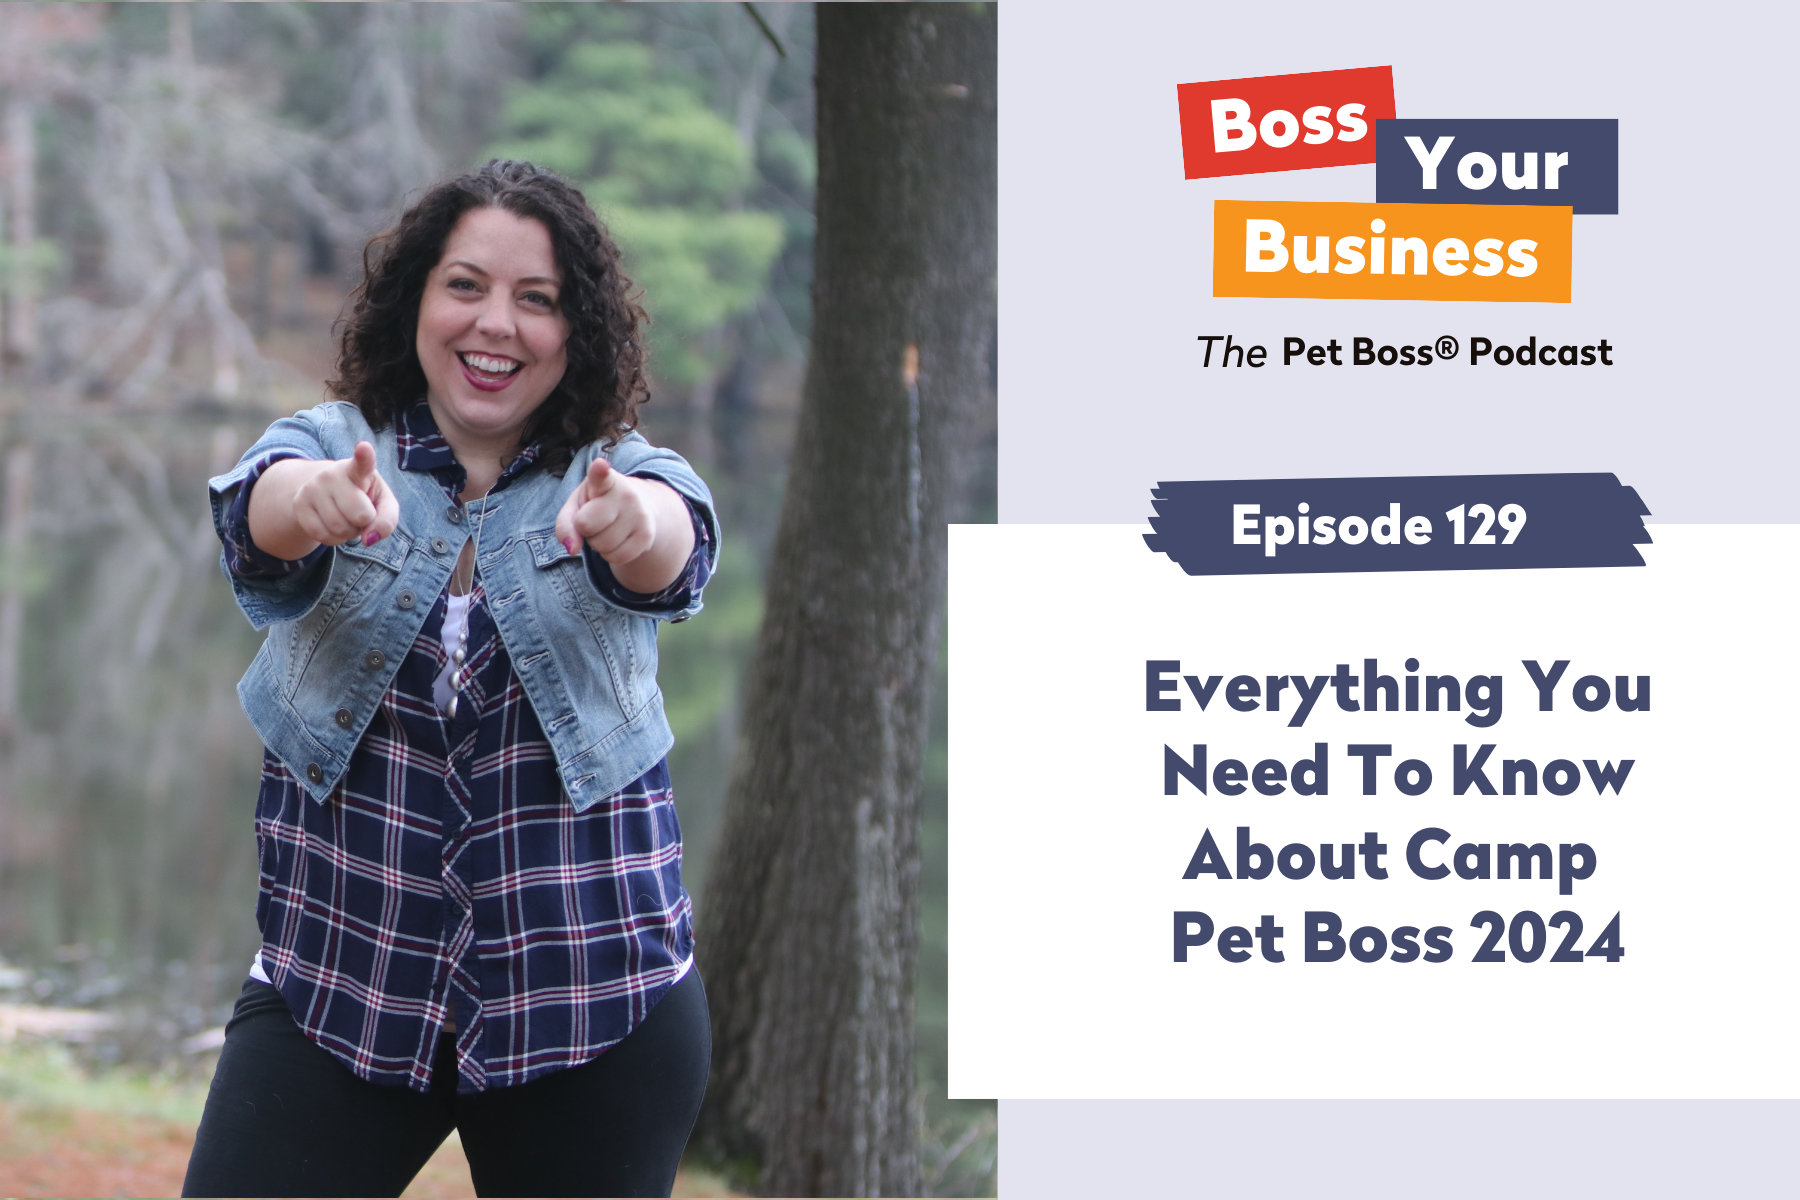 Episode 129 | Everything You Need To Know About Camp Pet Boss 2024